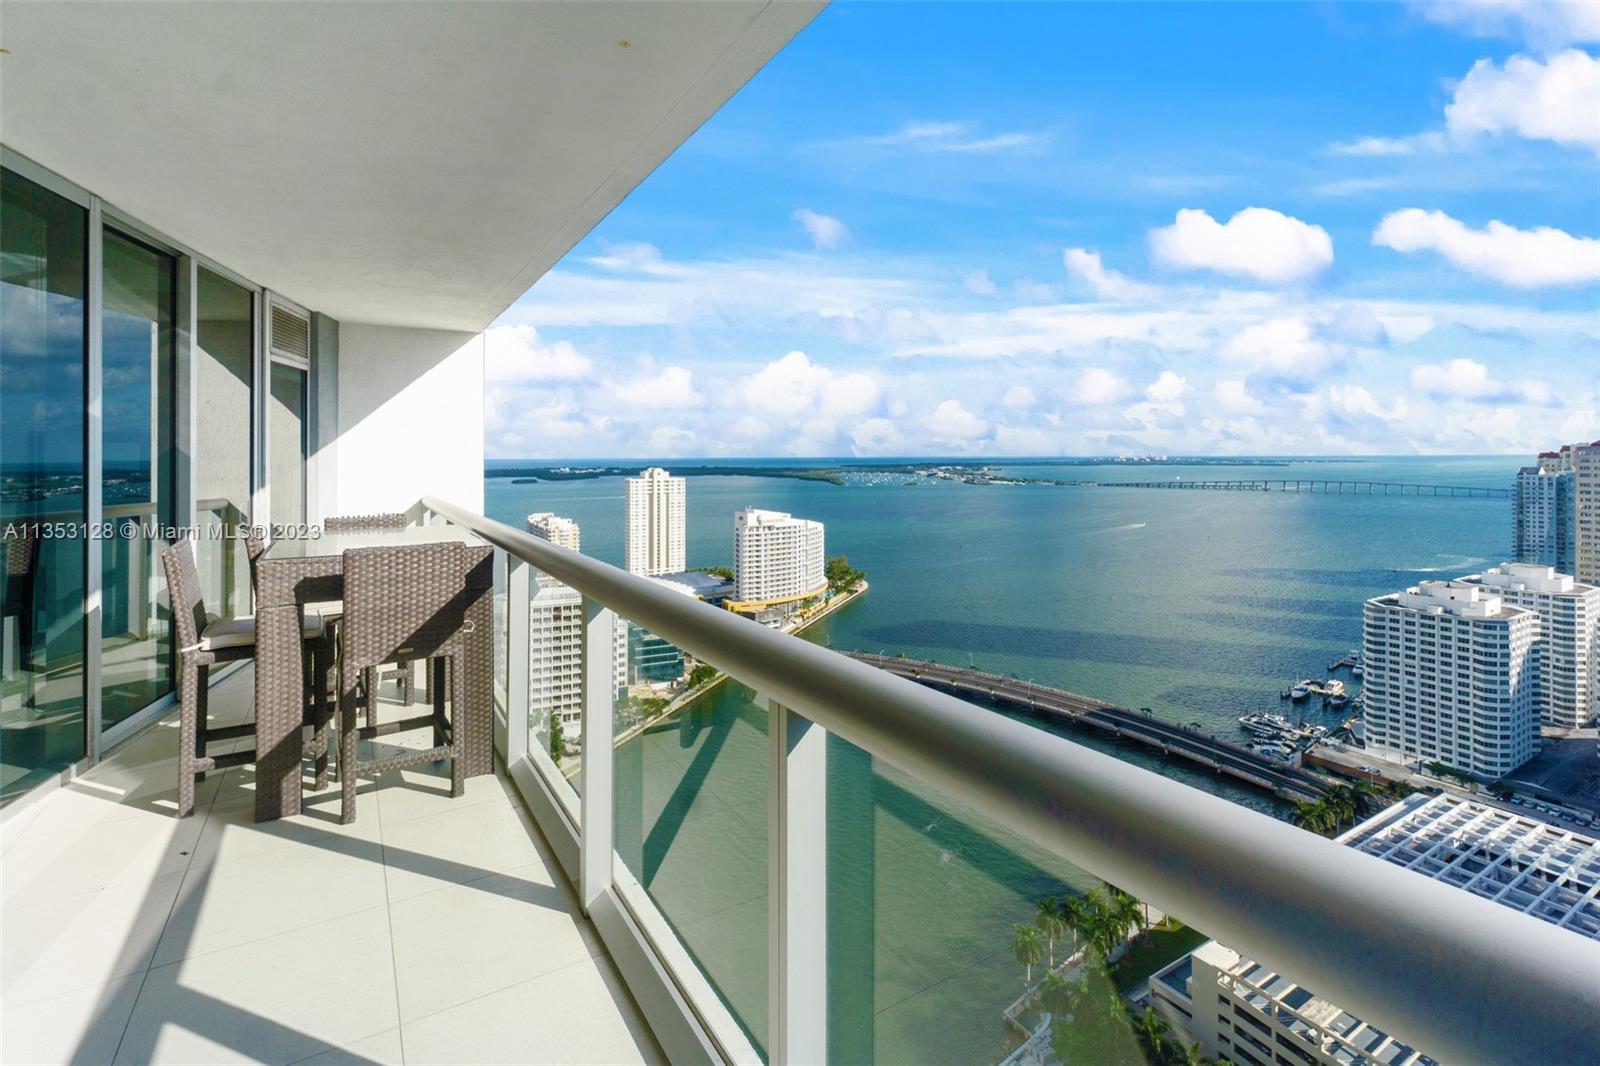 Amazing high floor 1 bed at ICON Brickell! This oversized 1 bed/ 1 bath with 1,035 sqft of interior 